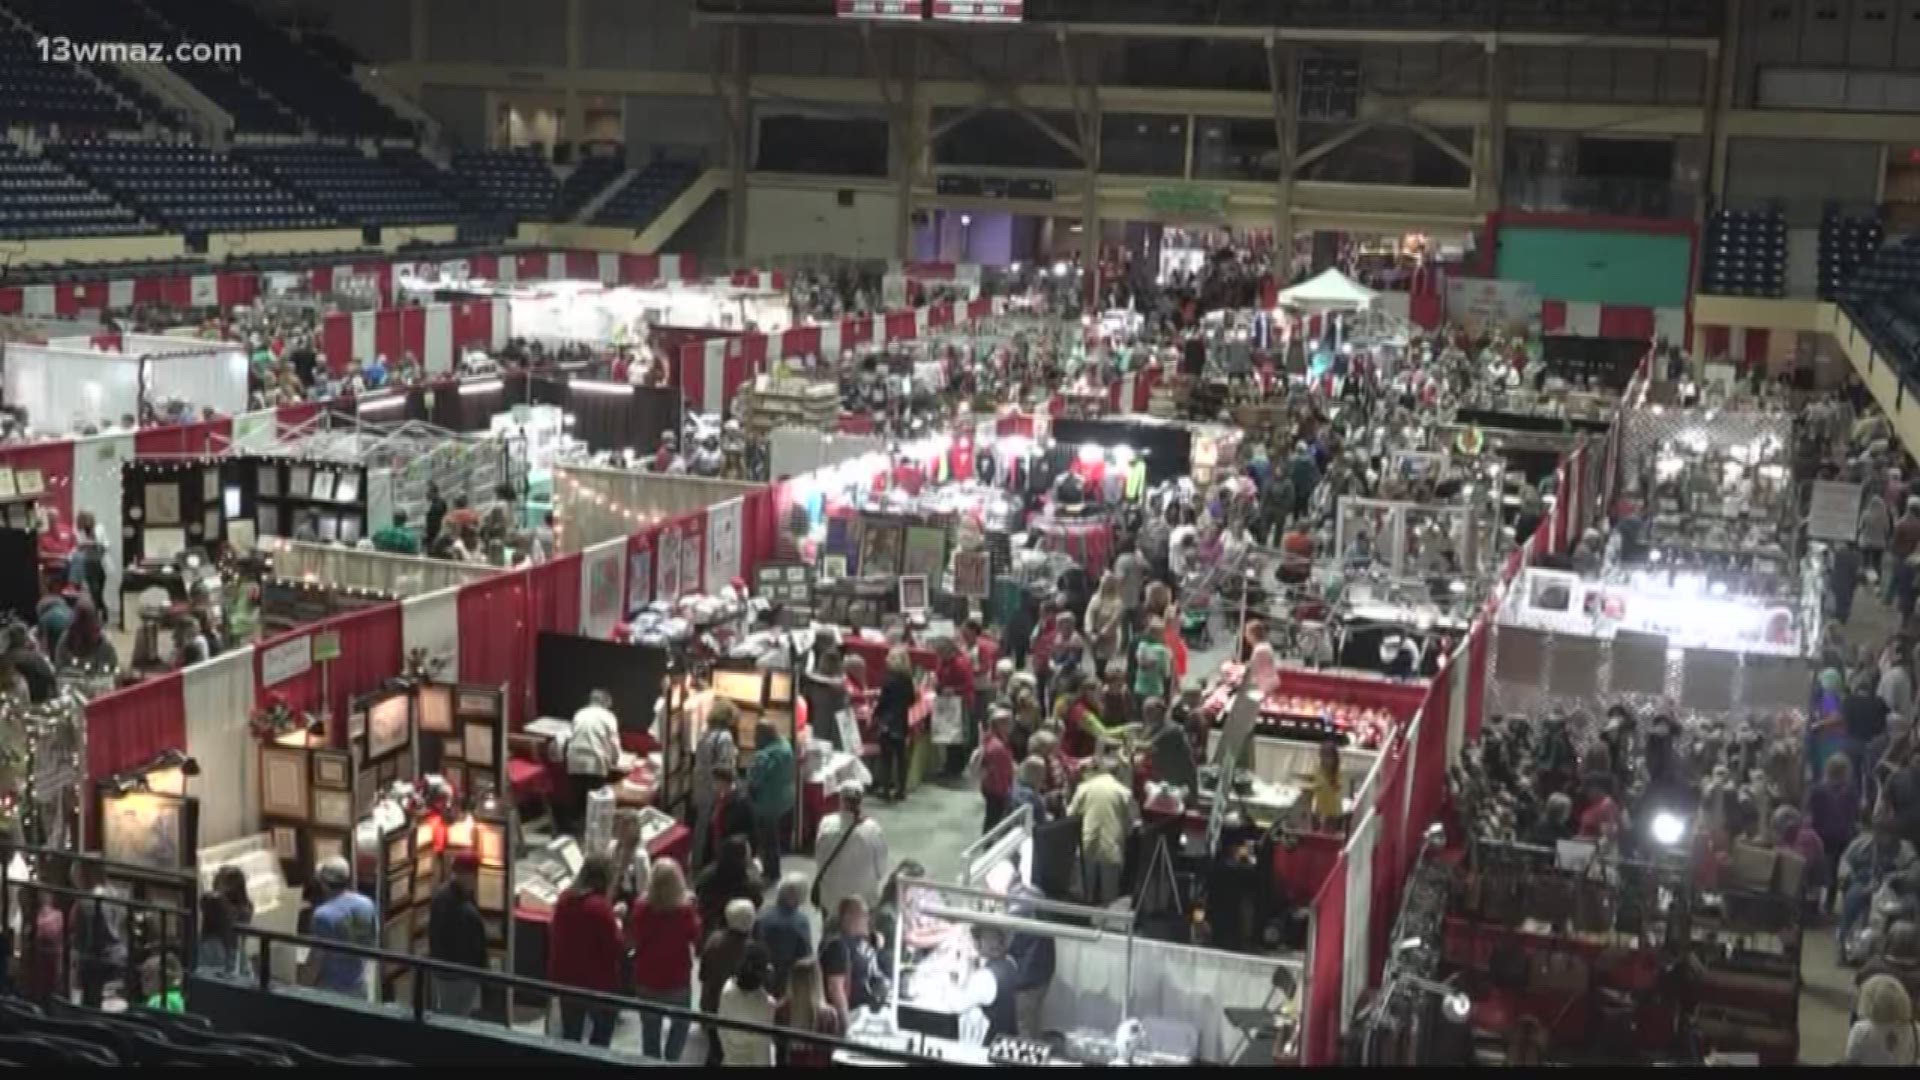 Christmas Made in the South is holding their annual show at the Macon Coliseum this weekend. Vendors are already having record-breaking sales.